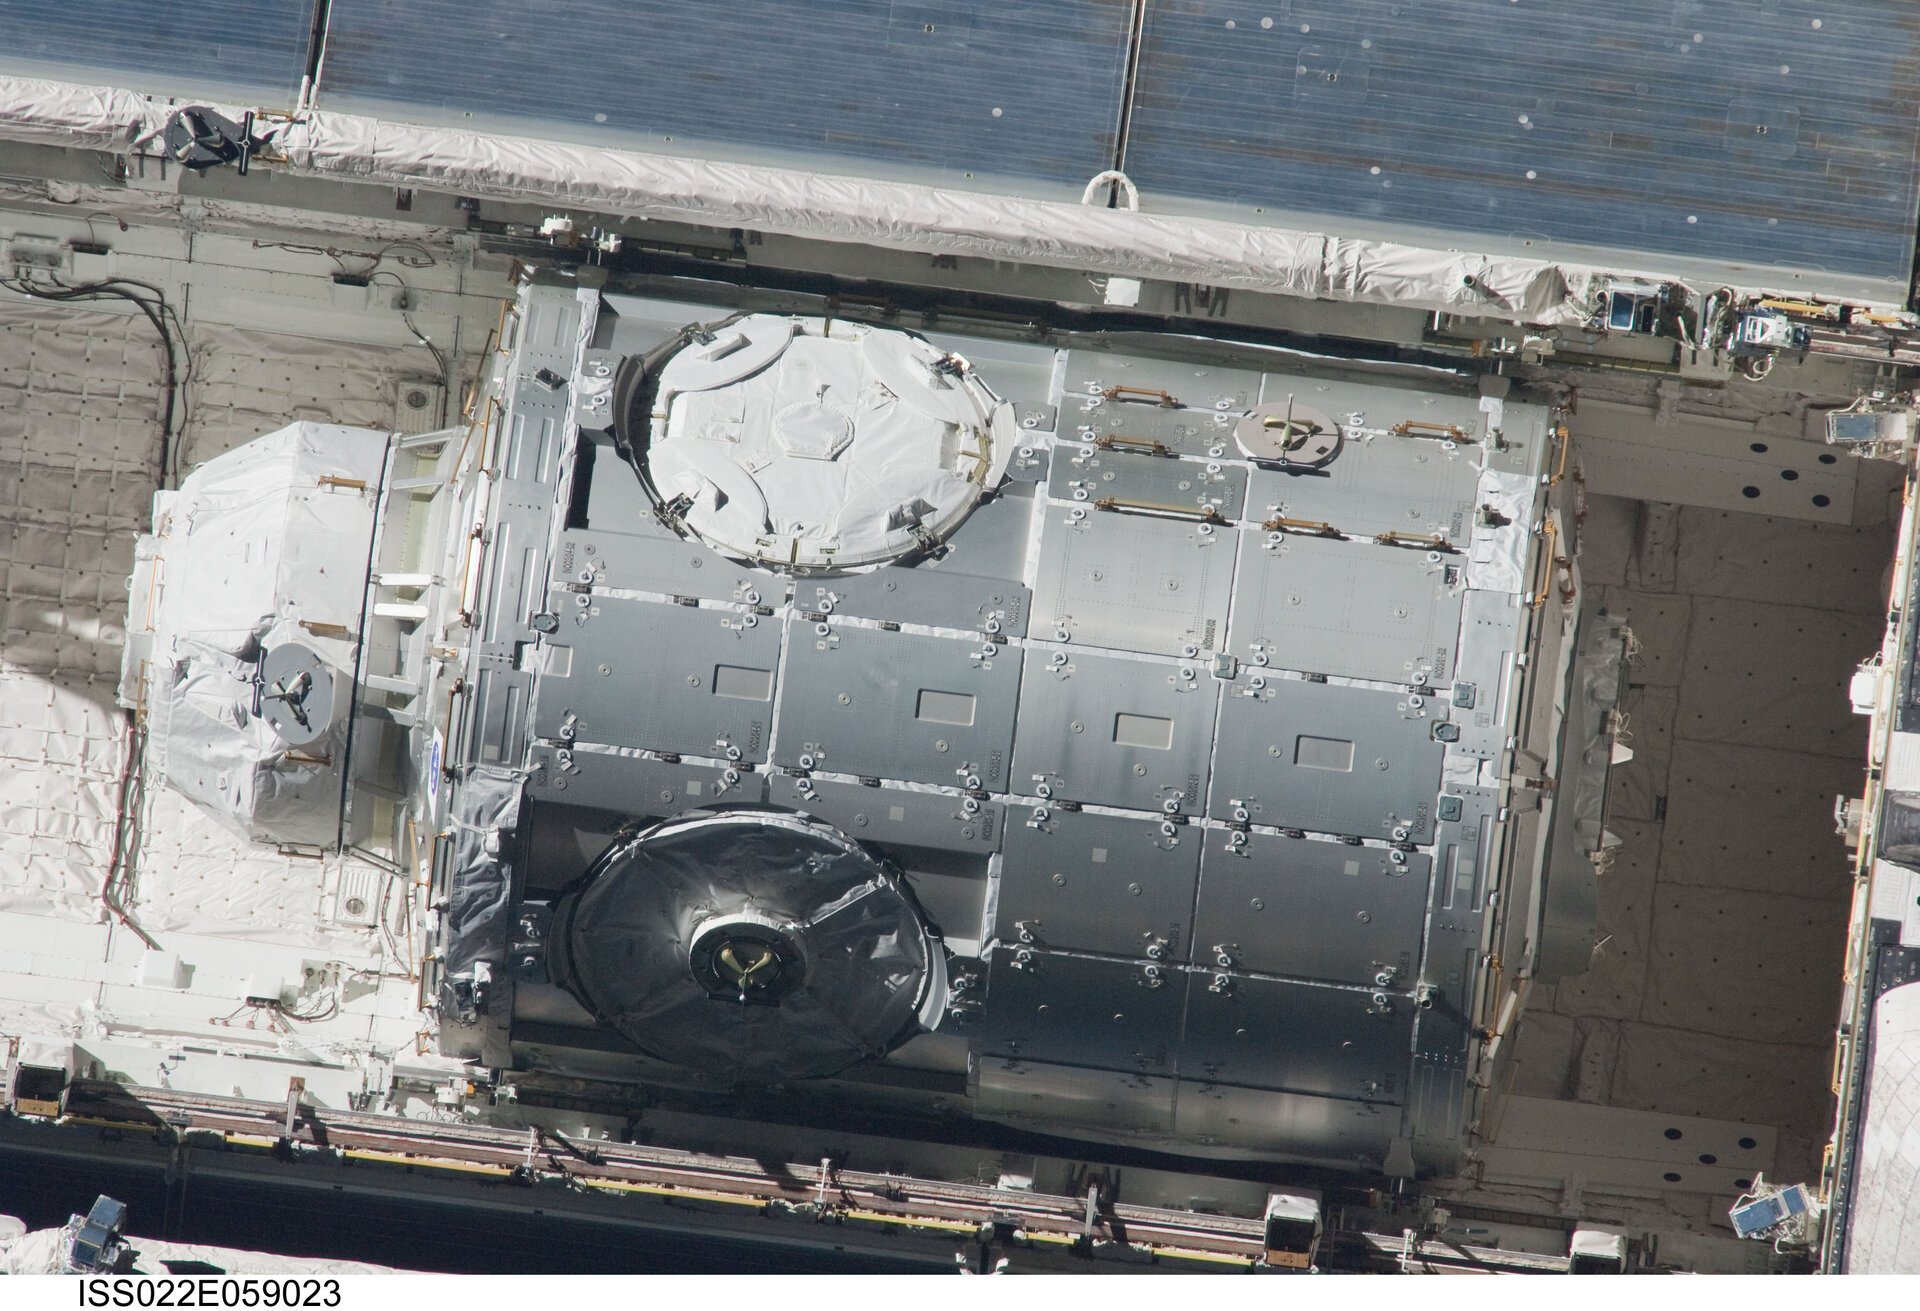 Node-3 and Cupola in the cargo bay of Endeavour